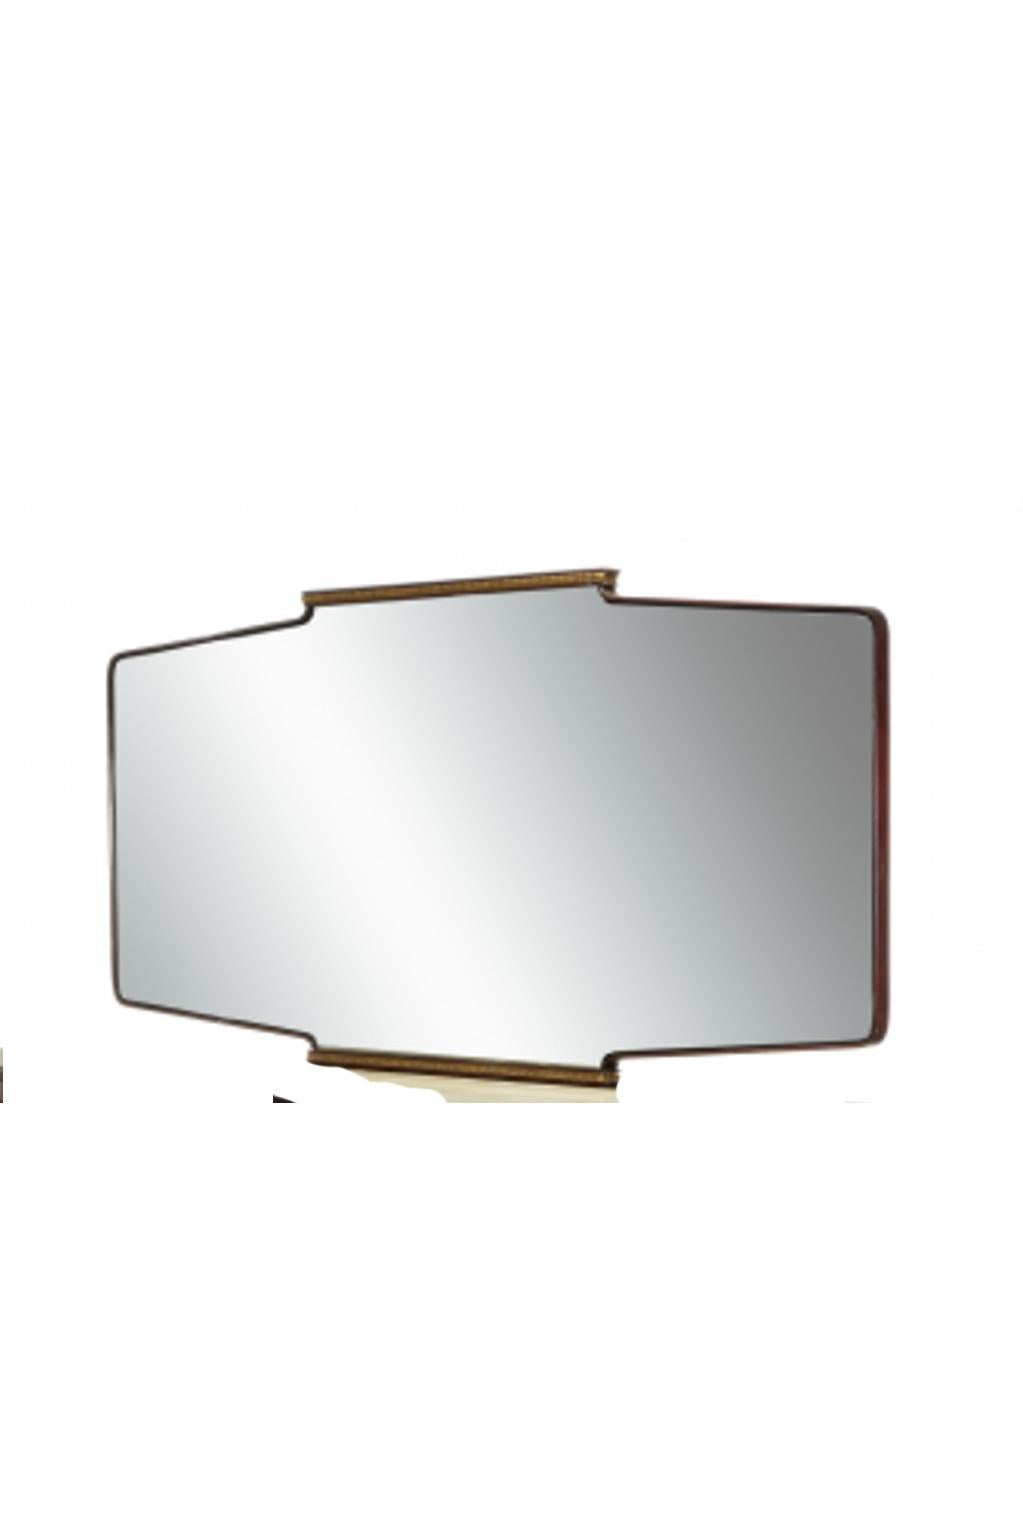 Osvaldo Borsani buffet with Large rectangular-shaped mirror (concave edges) in wood edged in polished brass. Solid wood and Indian rosewood veneer, brass trimmings, back-painted glass top, and maple interior. Ferrules in cast brass.
Production